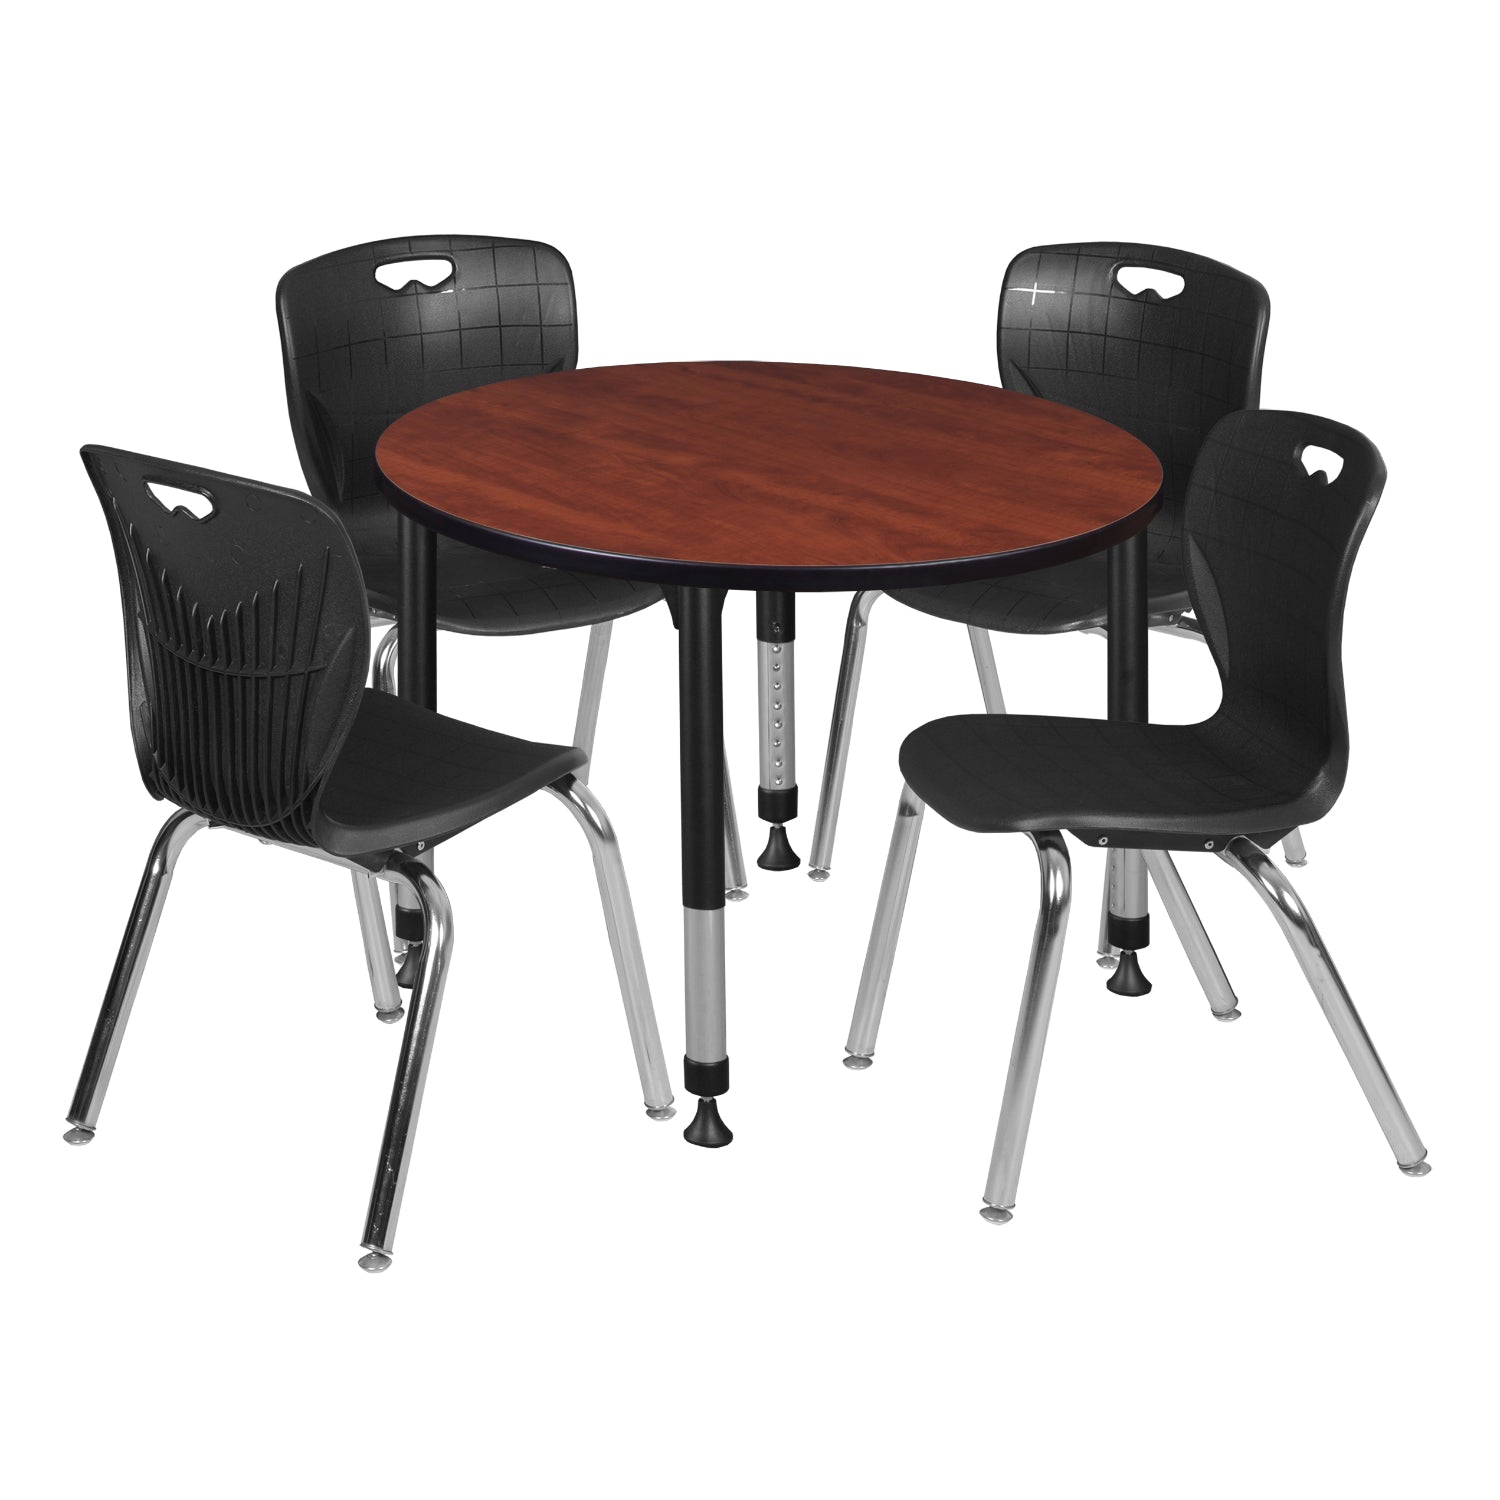 Kee Classroom Table and Chair Package, Kee 36" Round Adjustable Height Table with 4 Andy 18" Stack Chairs